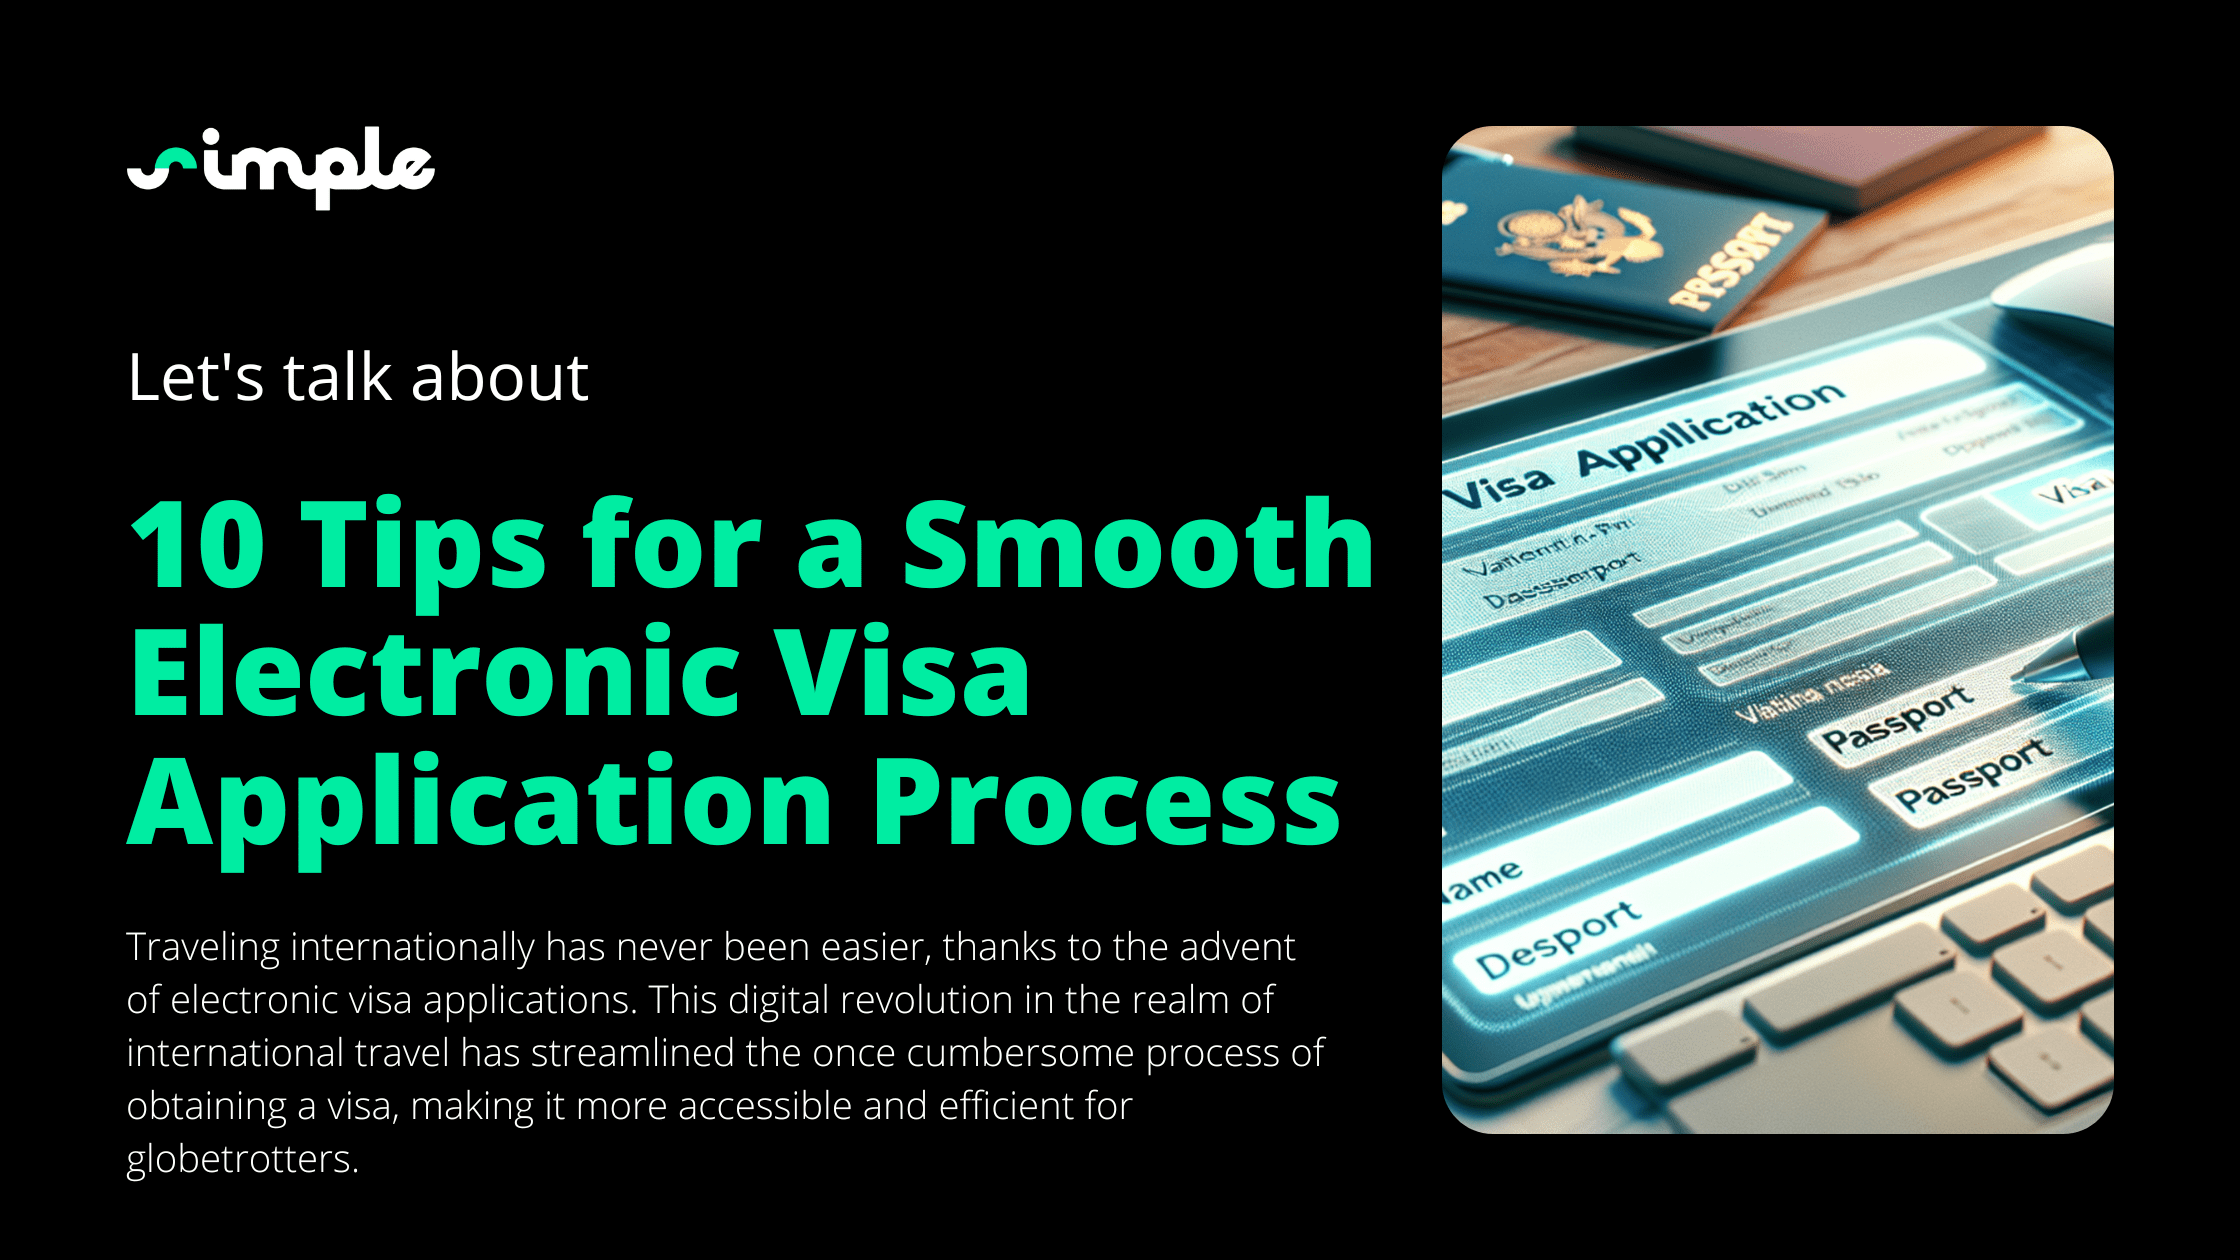 10 Tips for a Smooth Electronic Visa Application Process